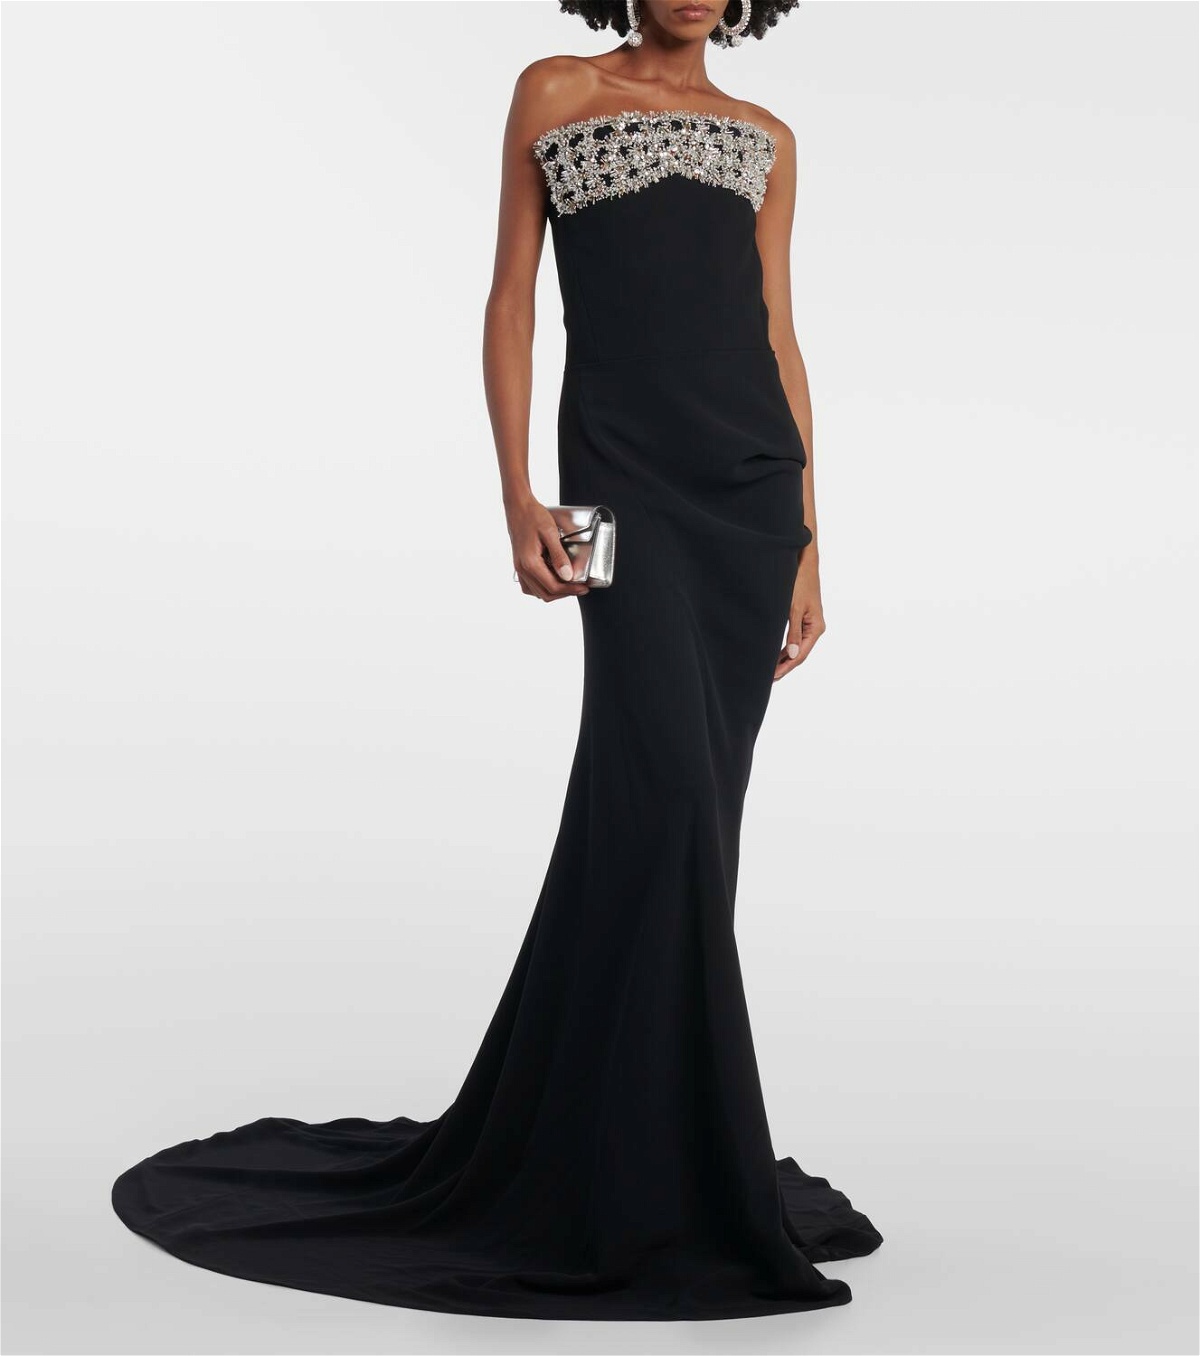 Candescence asymmetric bustier gown in black - Maticevski